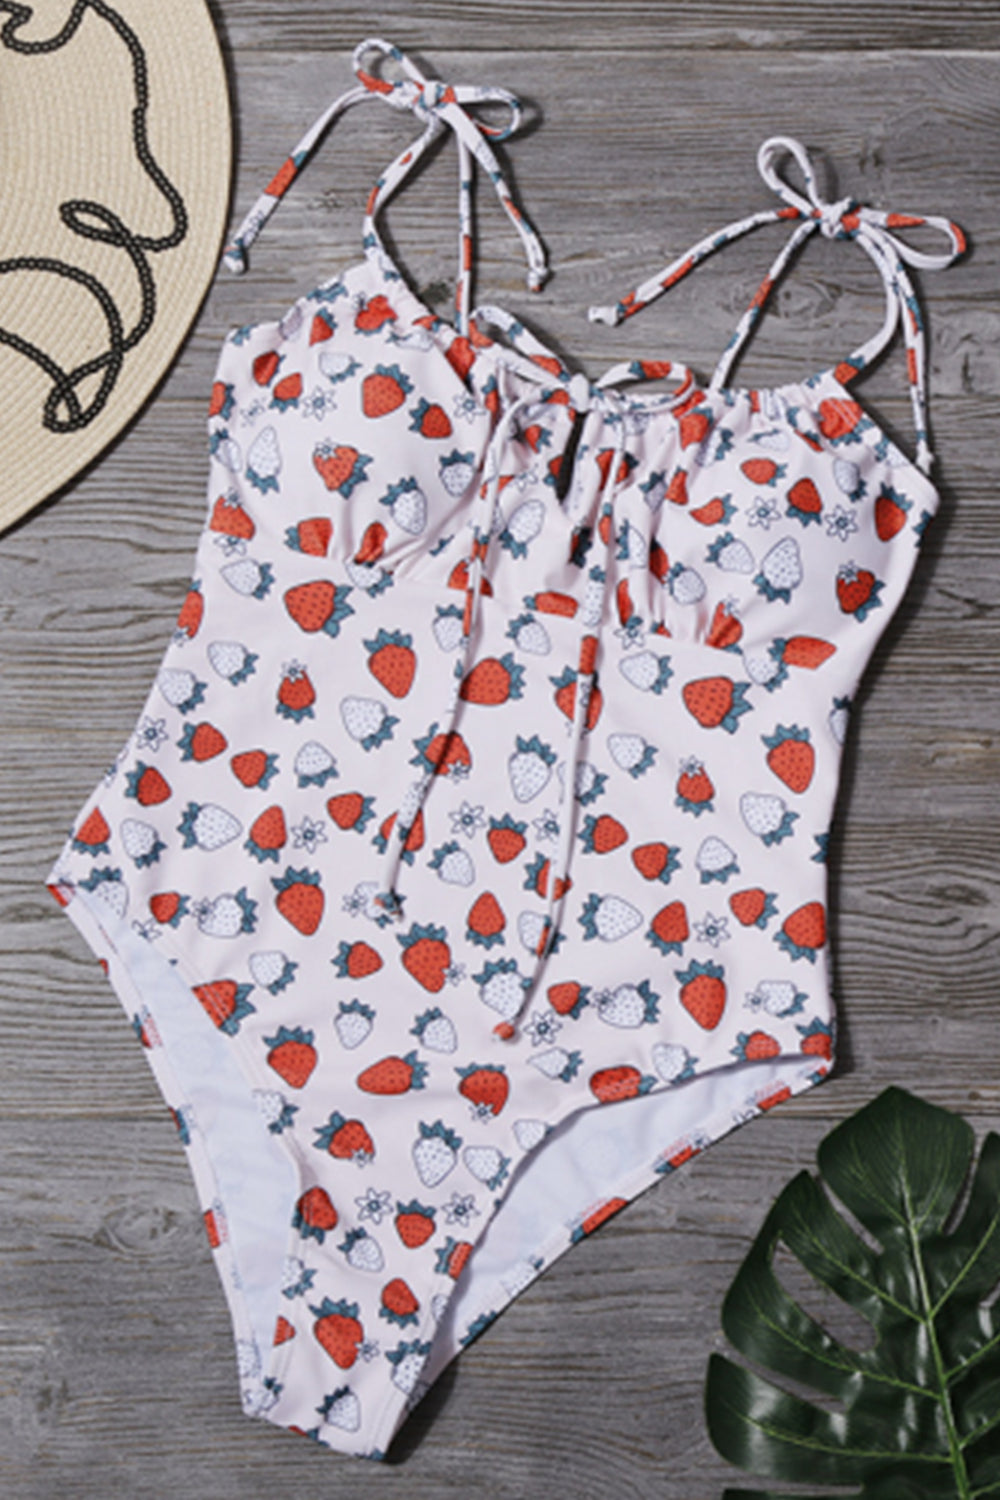 GRILS STRAWBERRY PRINT PUSH UP ONE PIECE SWIMSUIT